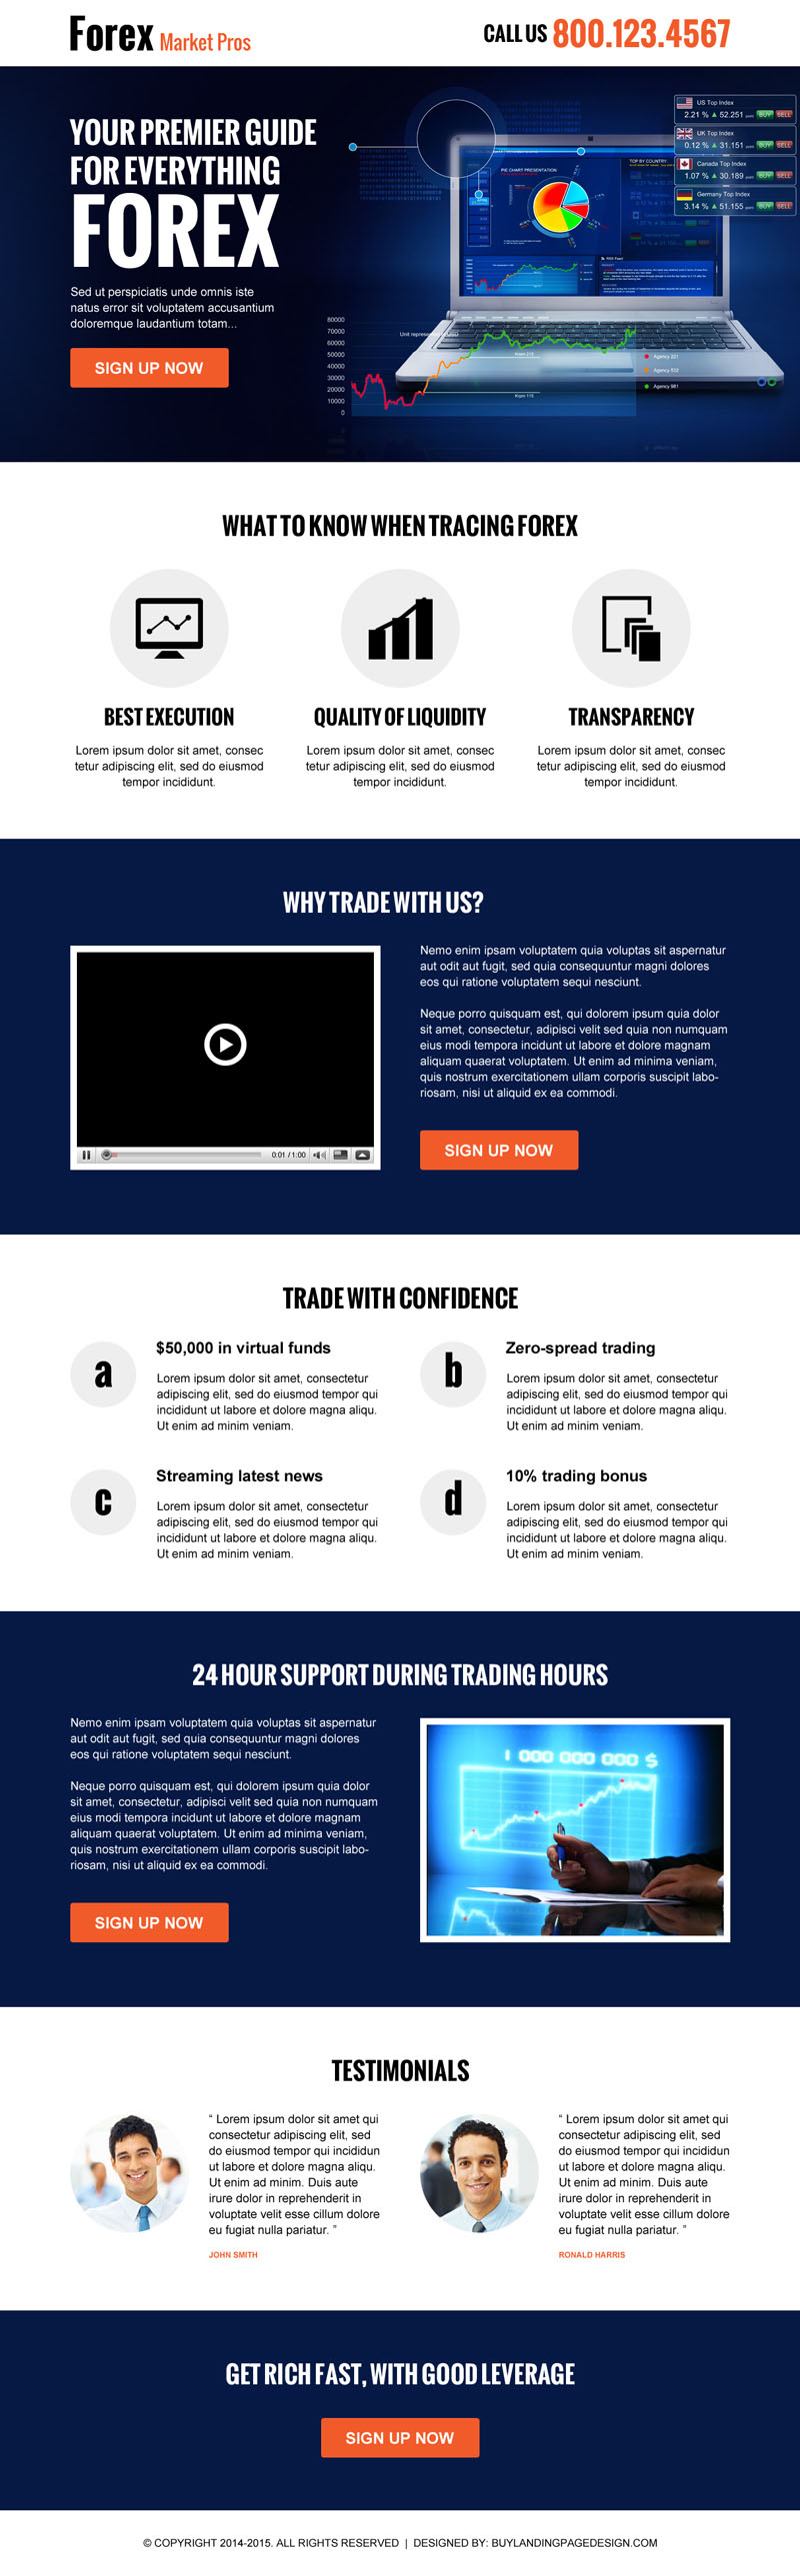 forex-marketing-guide-call-to-action-landing-page-design-template-004